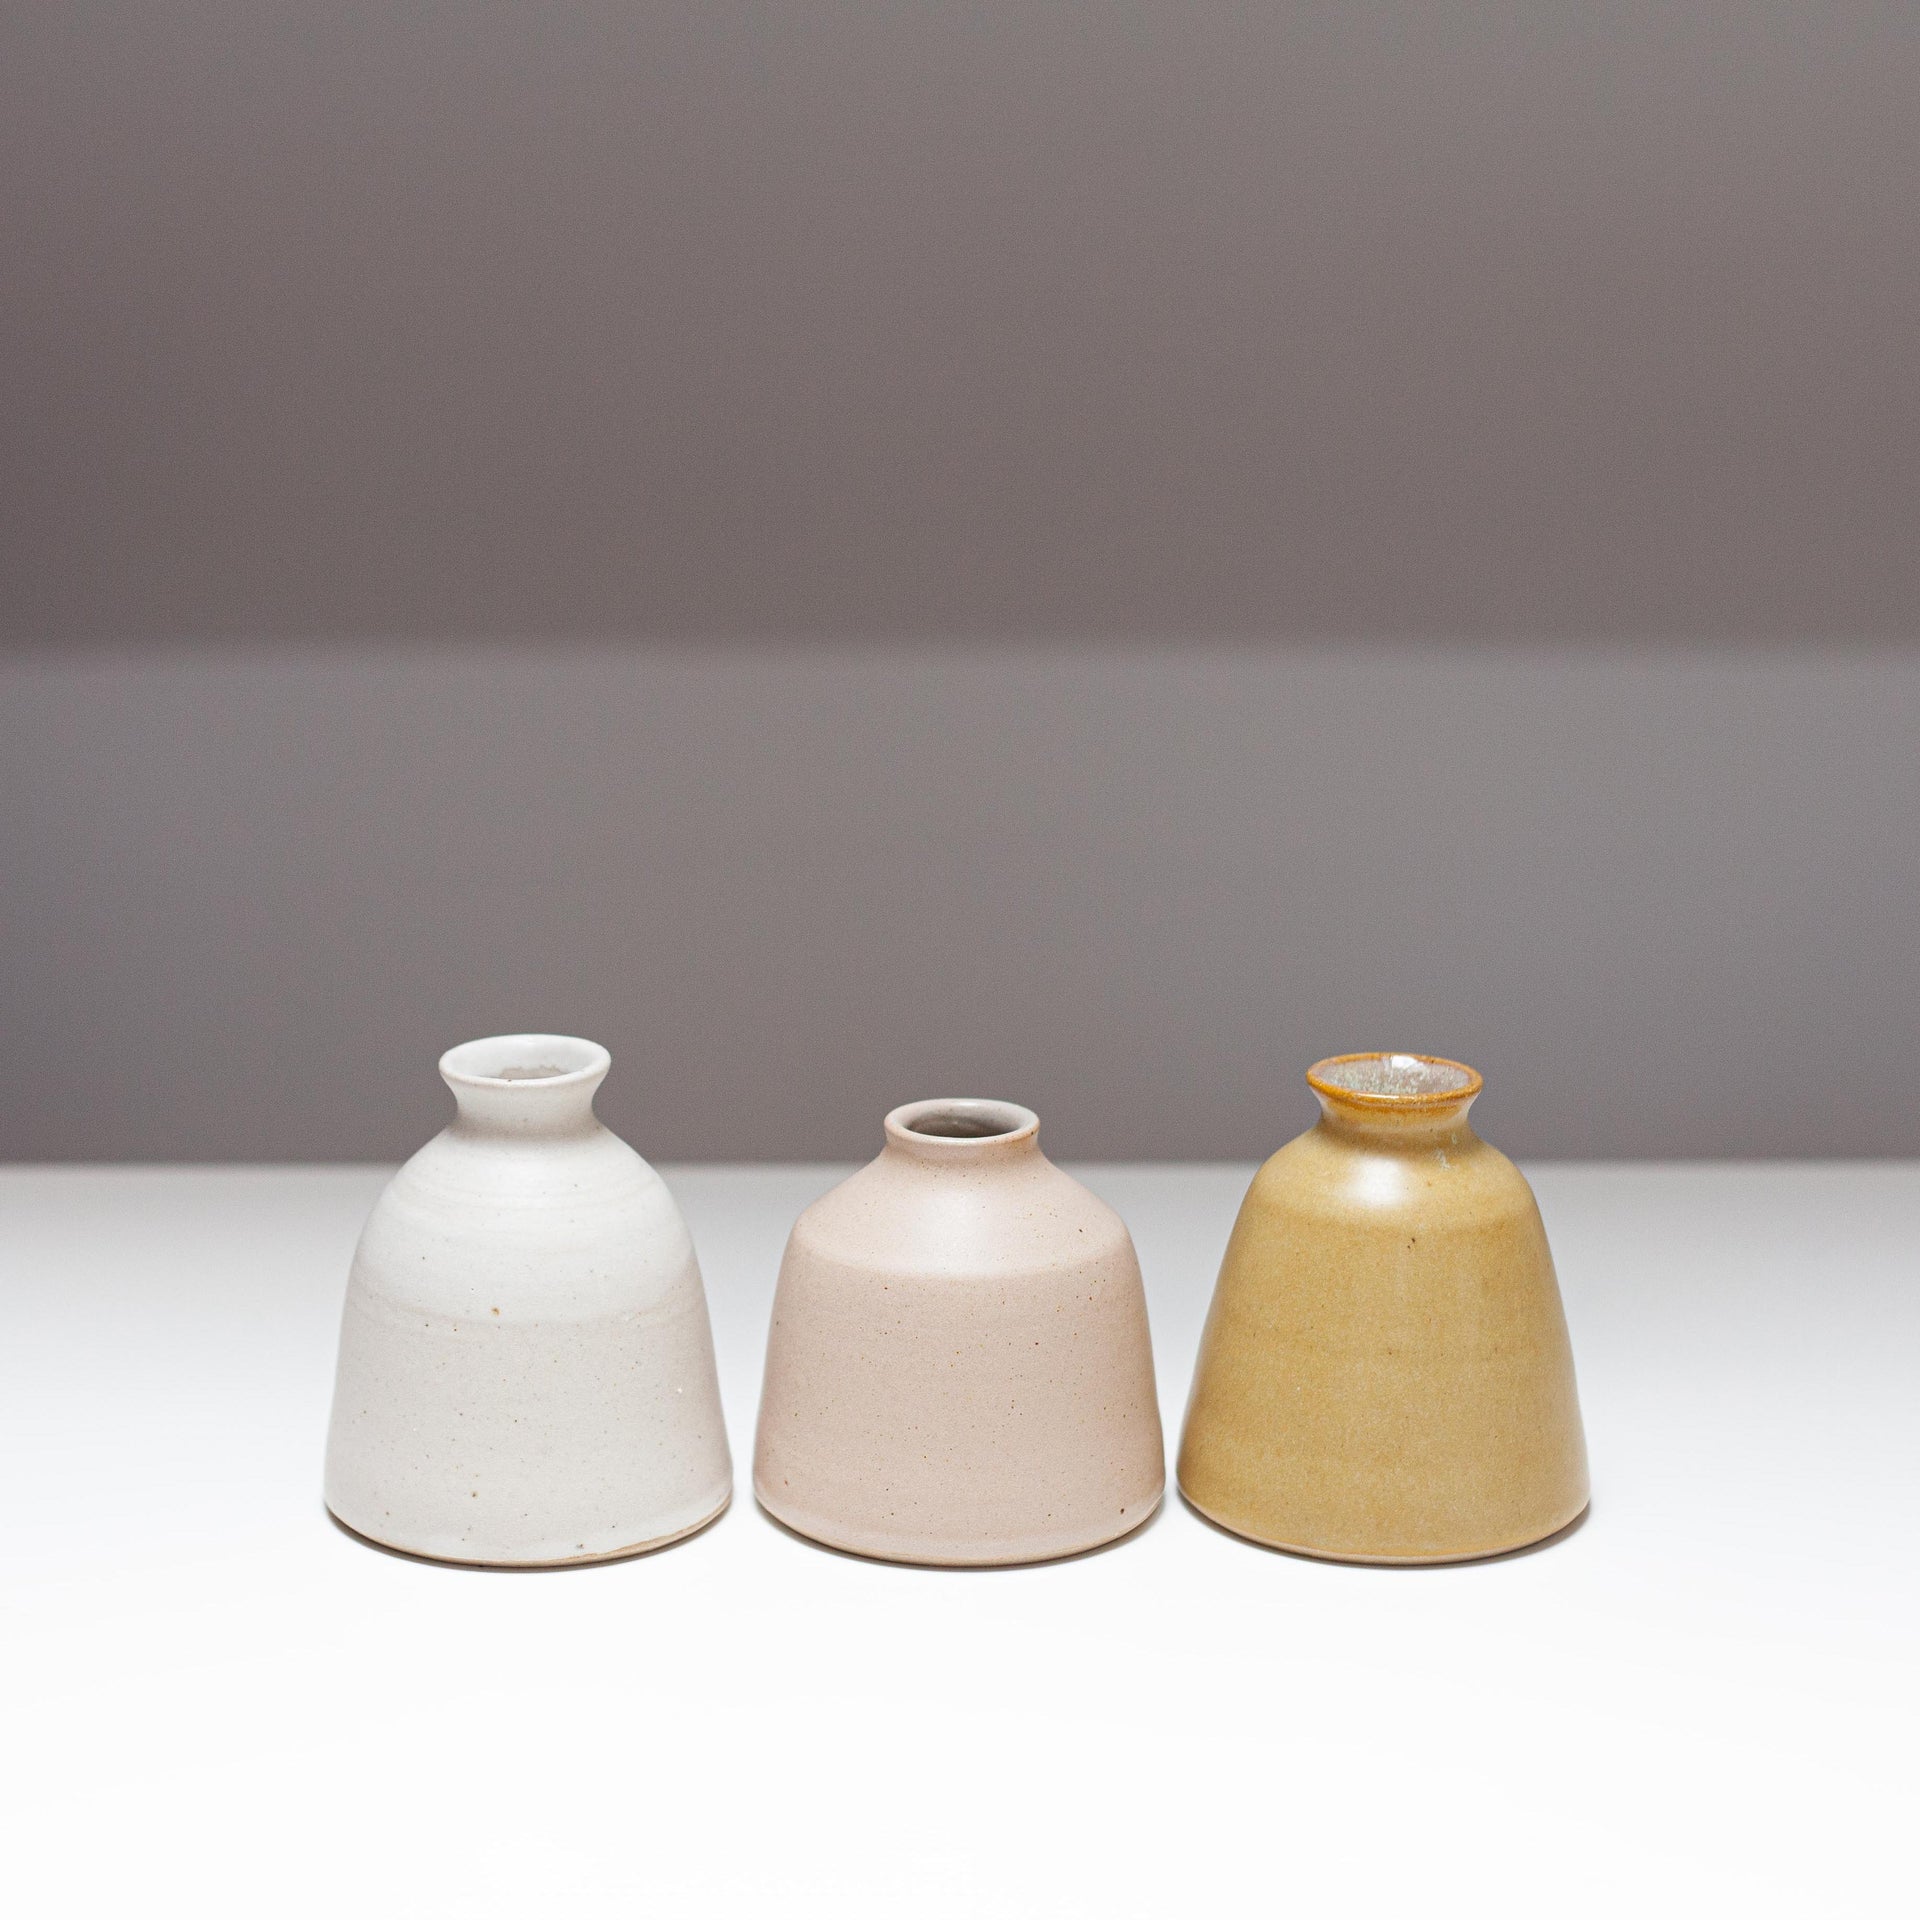 EOT Ceramics bud vase collection in white, pink and yellow